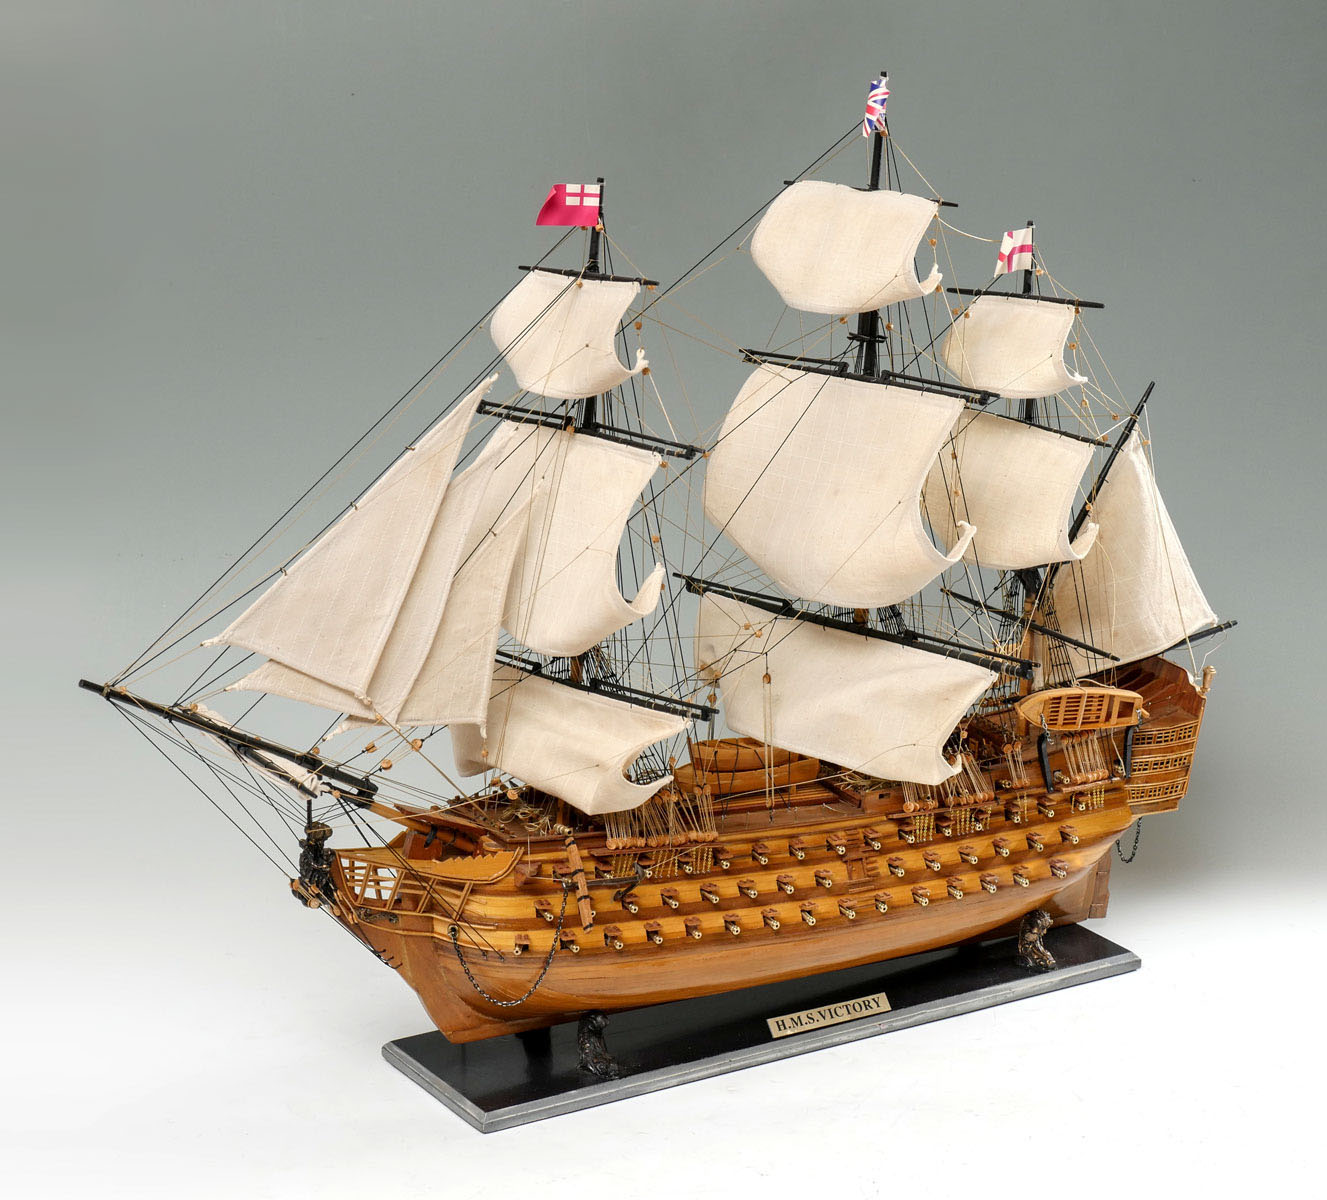 ENGLISH H.M.S. VICTORY SHIP MODEL: Wooden